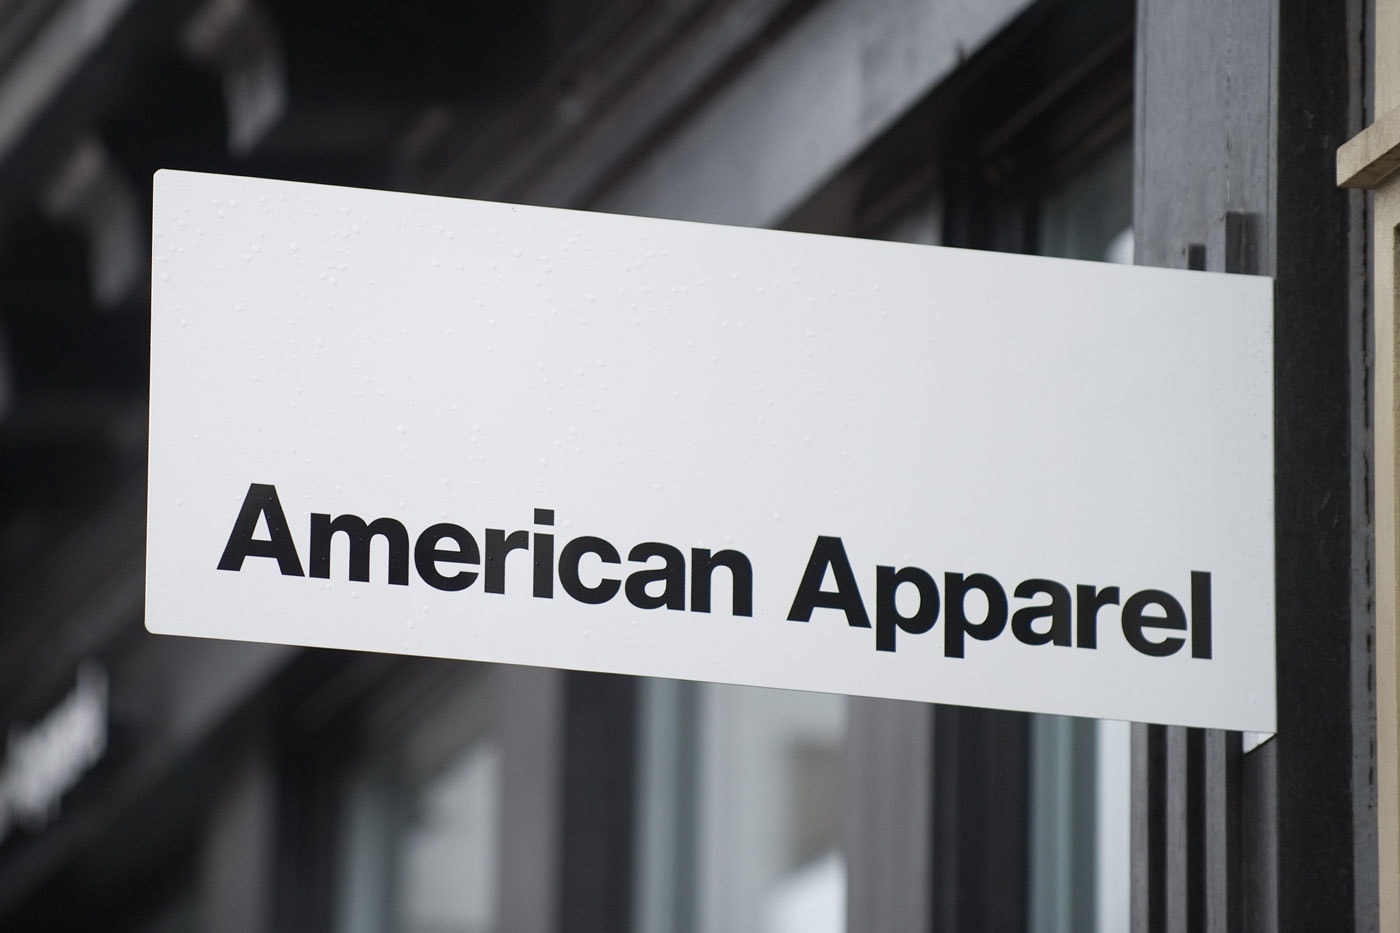 Why Fashion Brands All Use the Same-Style Font in Their Logos - Bloomberg